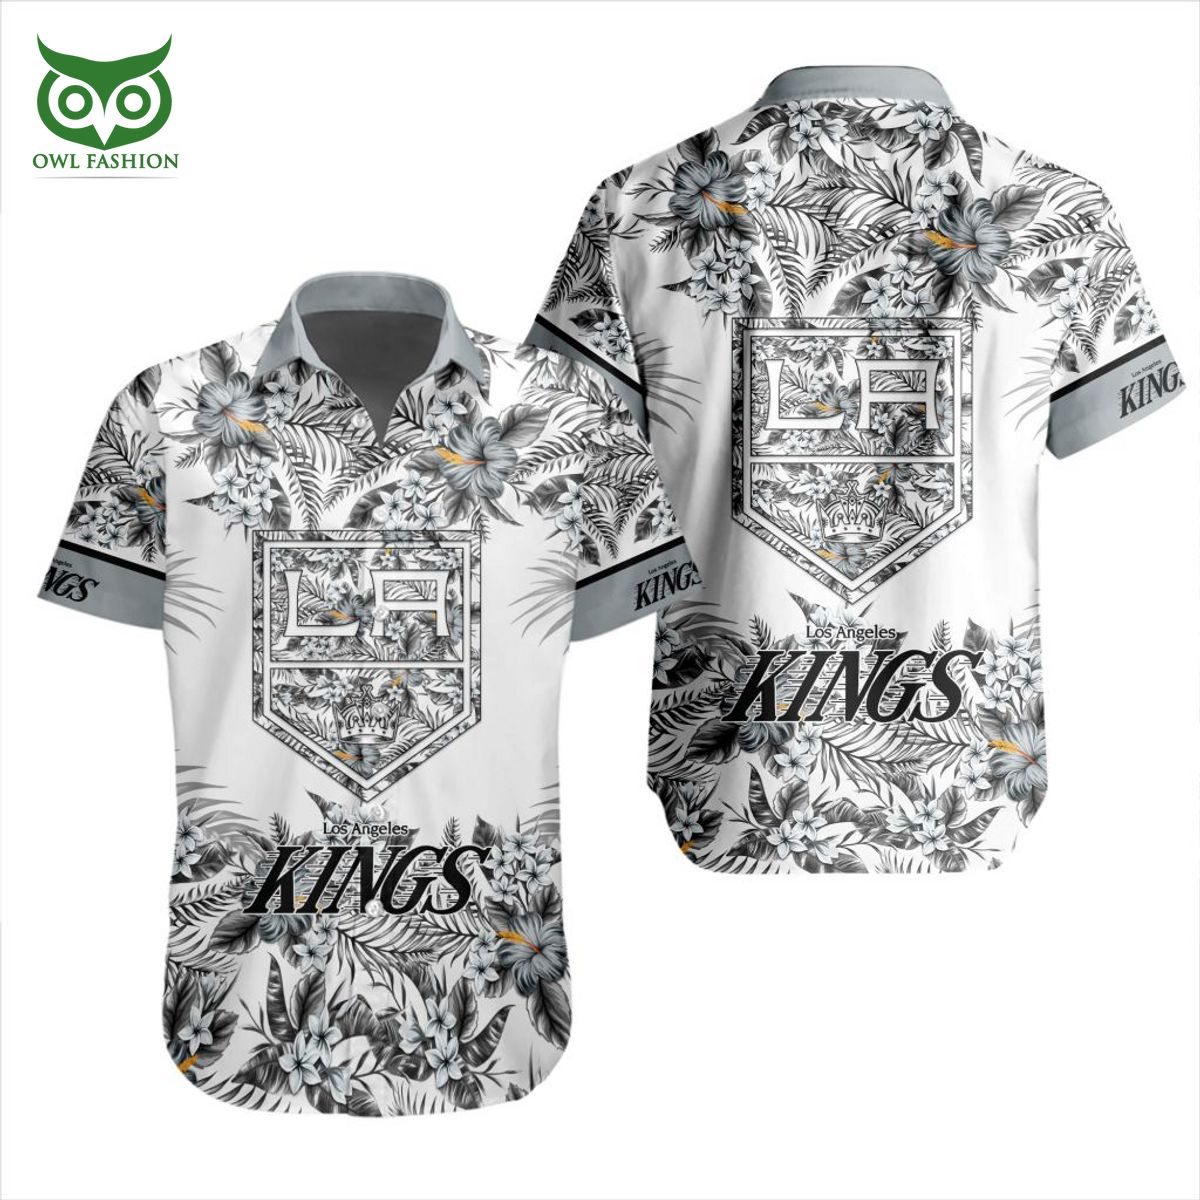 Los Angeles Kings Triumph Etched in Hawaiian Design - Trendy Aloha